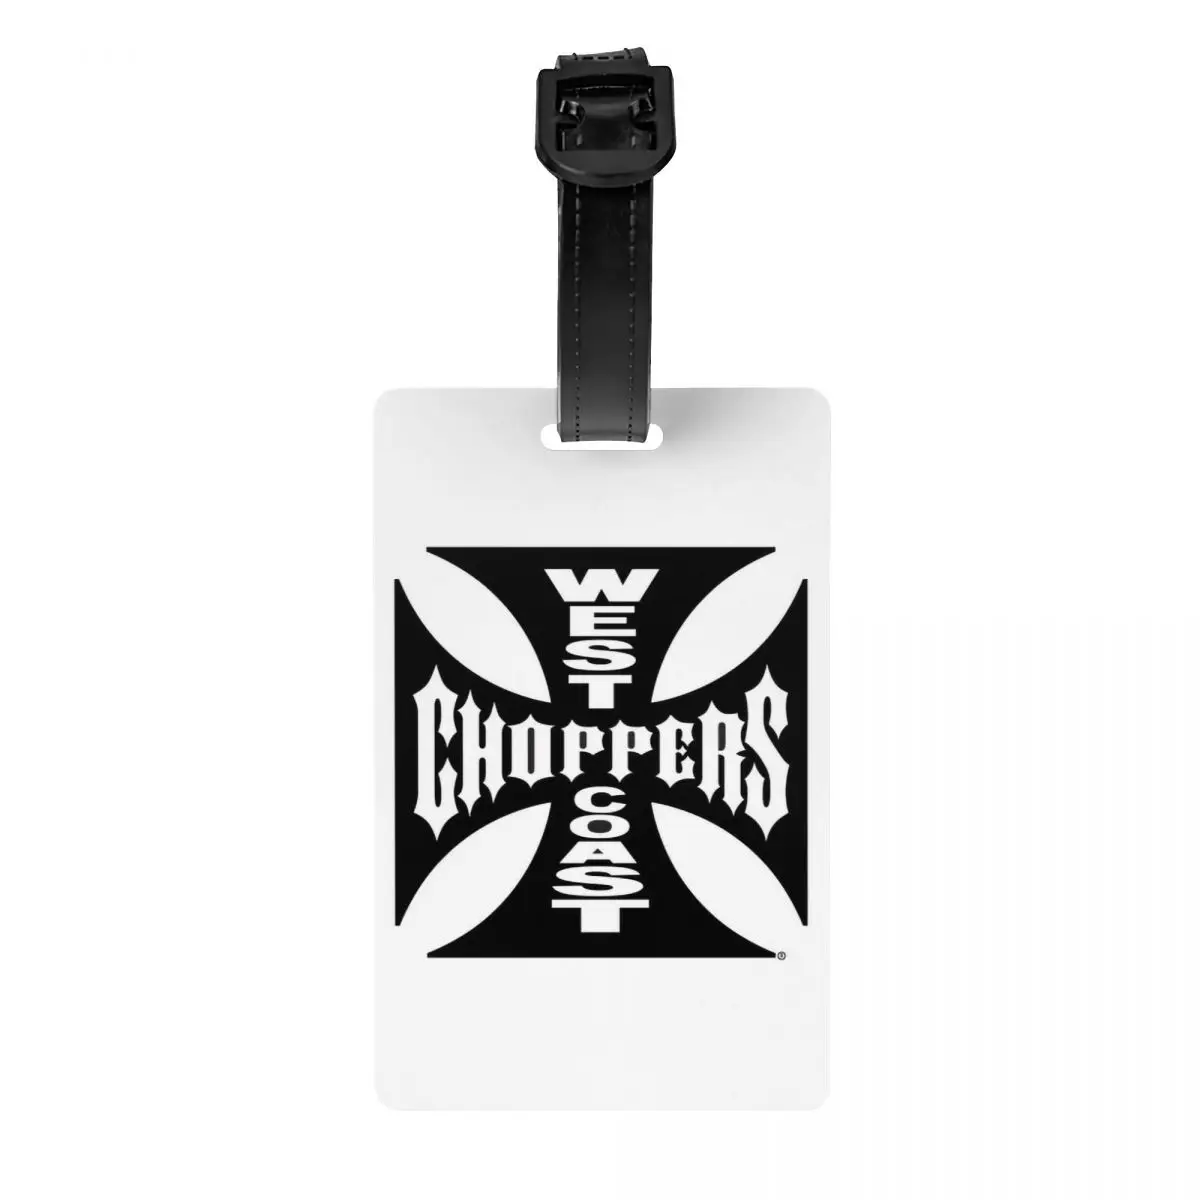 

Custom West Coast Iron Chopperss Luggage Tag Privacy Protection Cross Baggage Tags Travel Bag Labels Suitcase